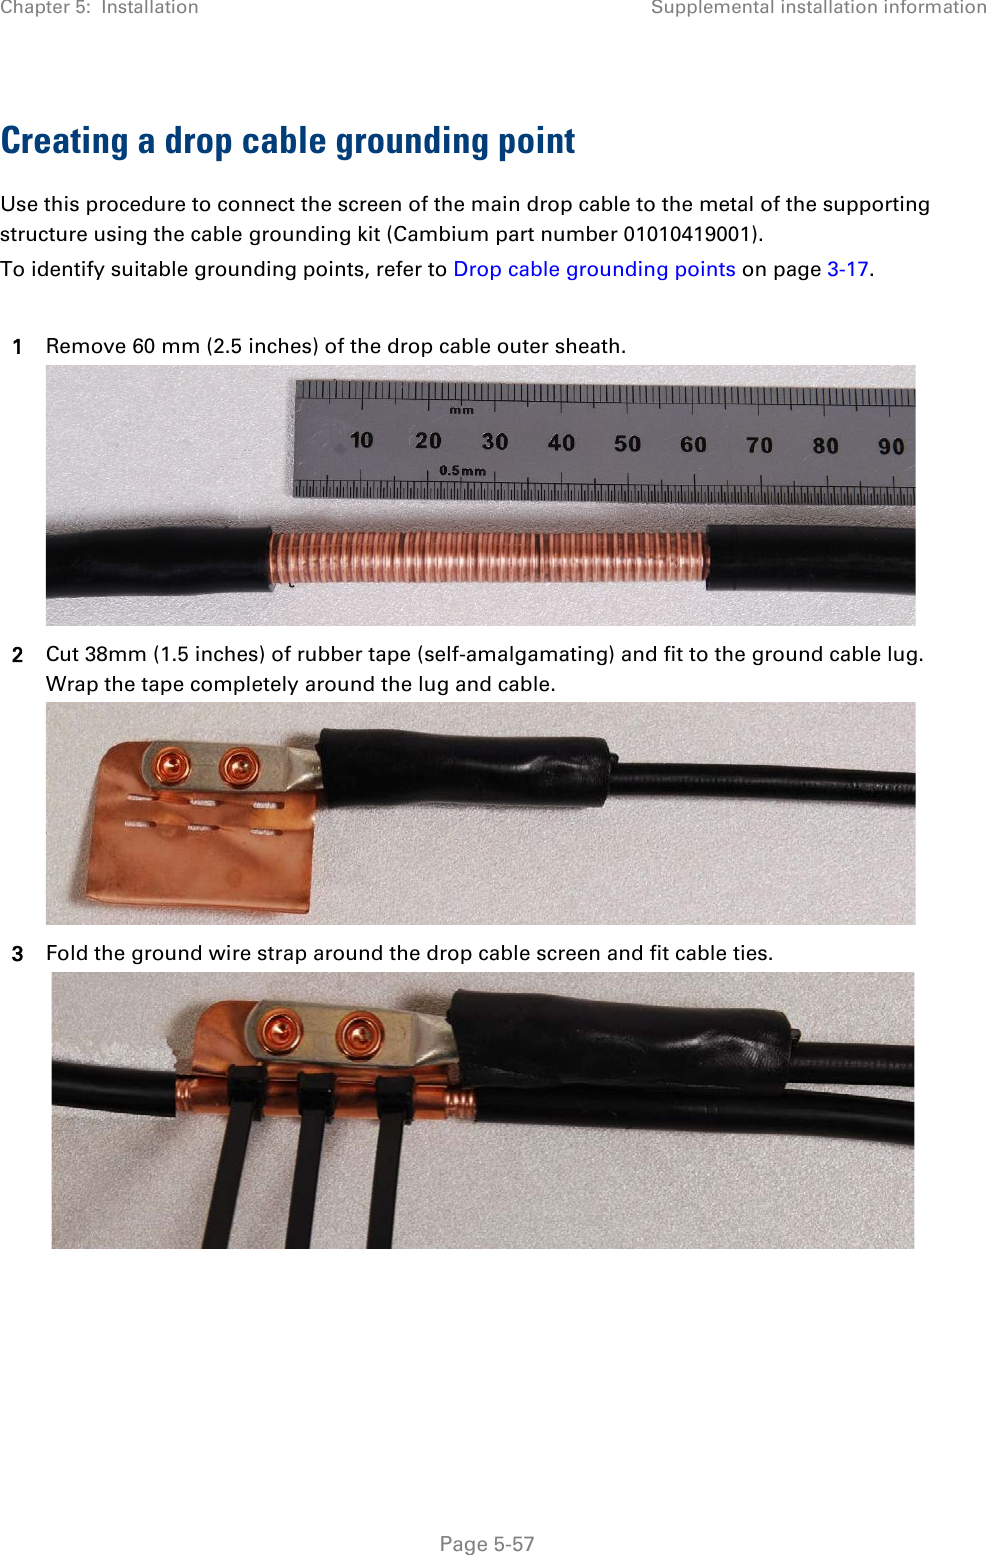 Chapter 5:  Installation Supplemental installation information  Creating a drop cable grounding point Use this procedure to connect the screen of the main drop cable to the metal of the supporting structure using the cable grounding kit (Cambium part number 01010419001). To identify suitable grounding points, refer to Drop cable grounding points on page 3-17.  1 Remove 60 mm (2.5 inches) of the drop cable outer sheath.  2 Cut 38mm (1.5 inches) of rubber tape (self-amalgamating) and fit to the ground cable lug. Wrap the tape completely around the lug and cable.  3 Fold the ground wire strap around the drop cable screen and fit cable ties.     Page 5-57 